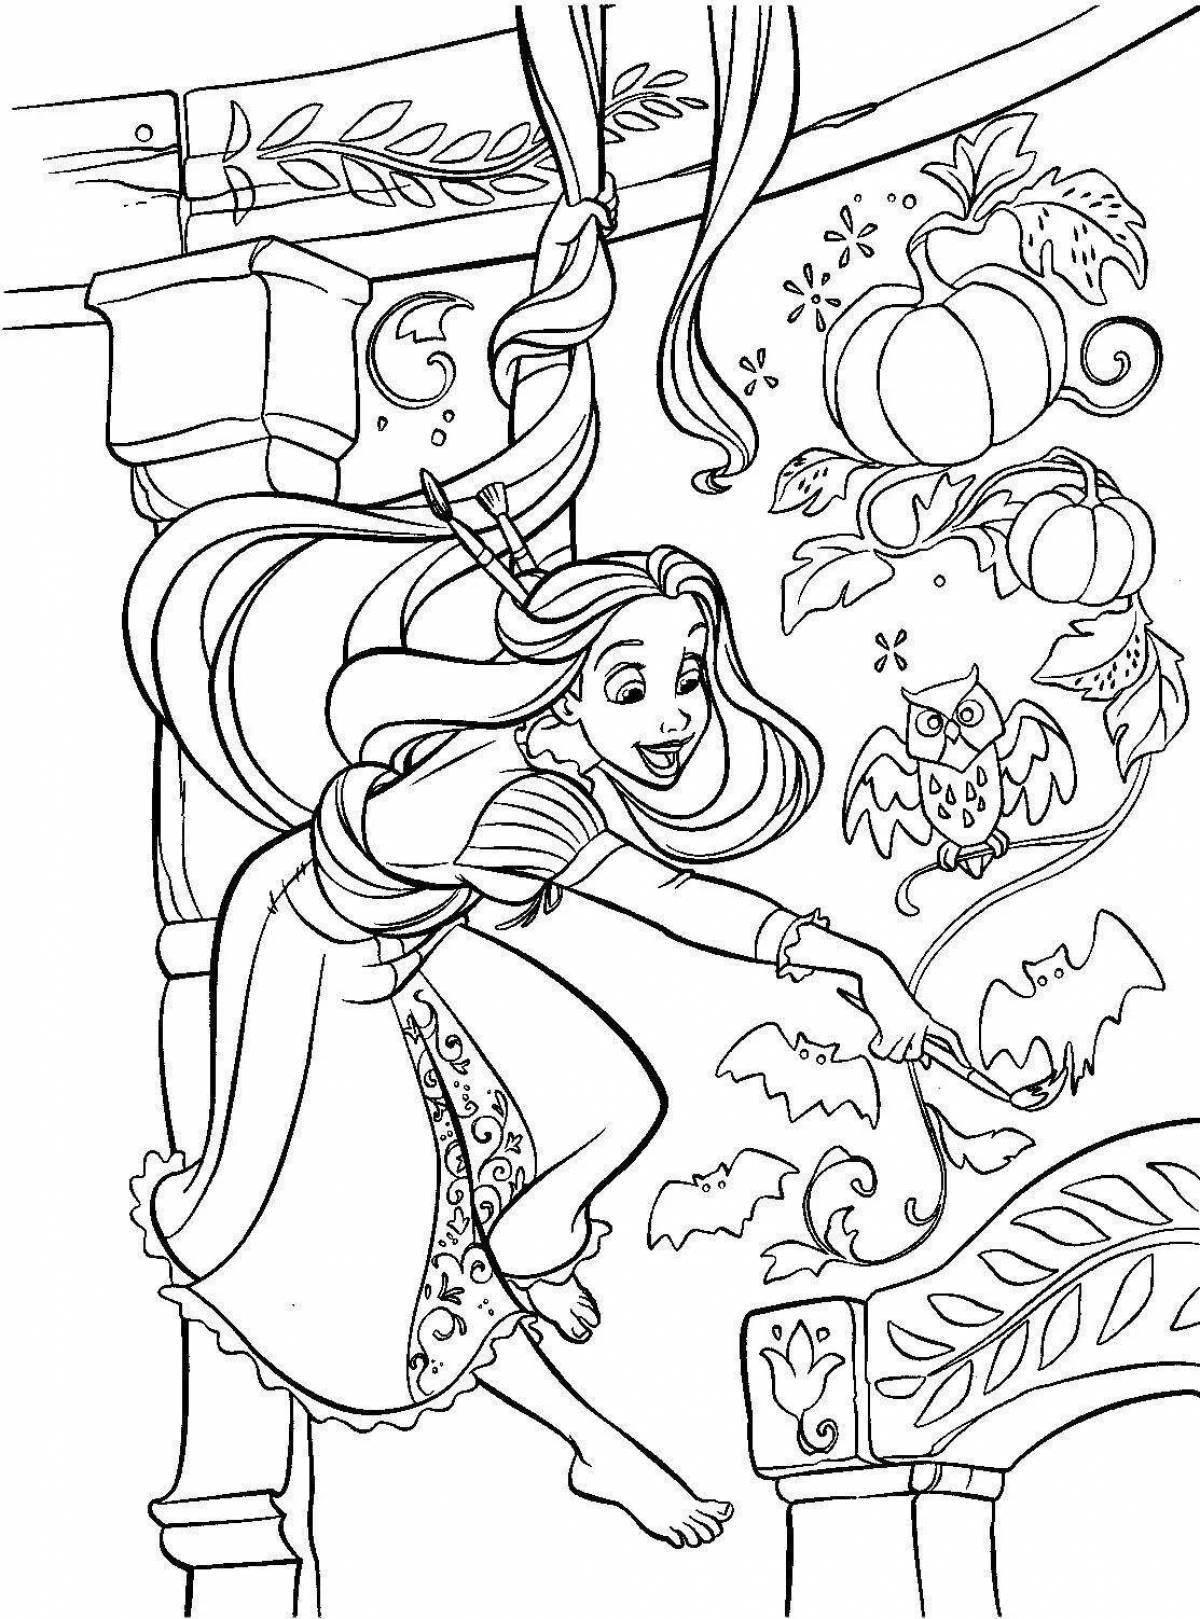 Lovely rapunzel coloring game